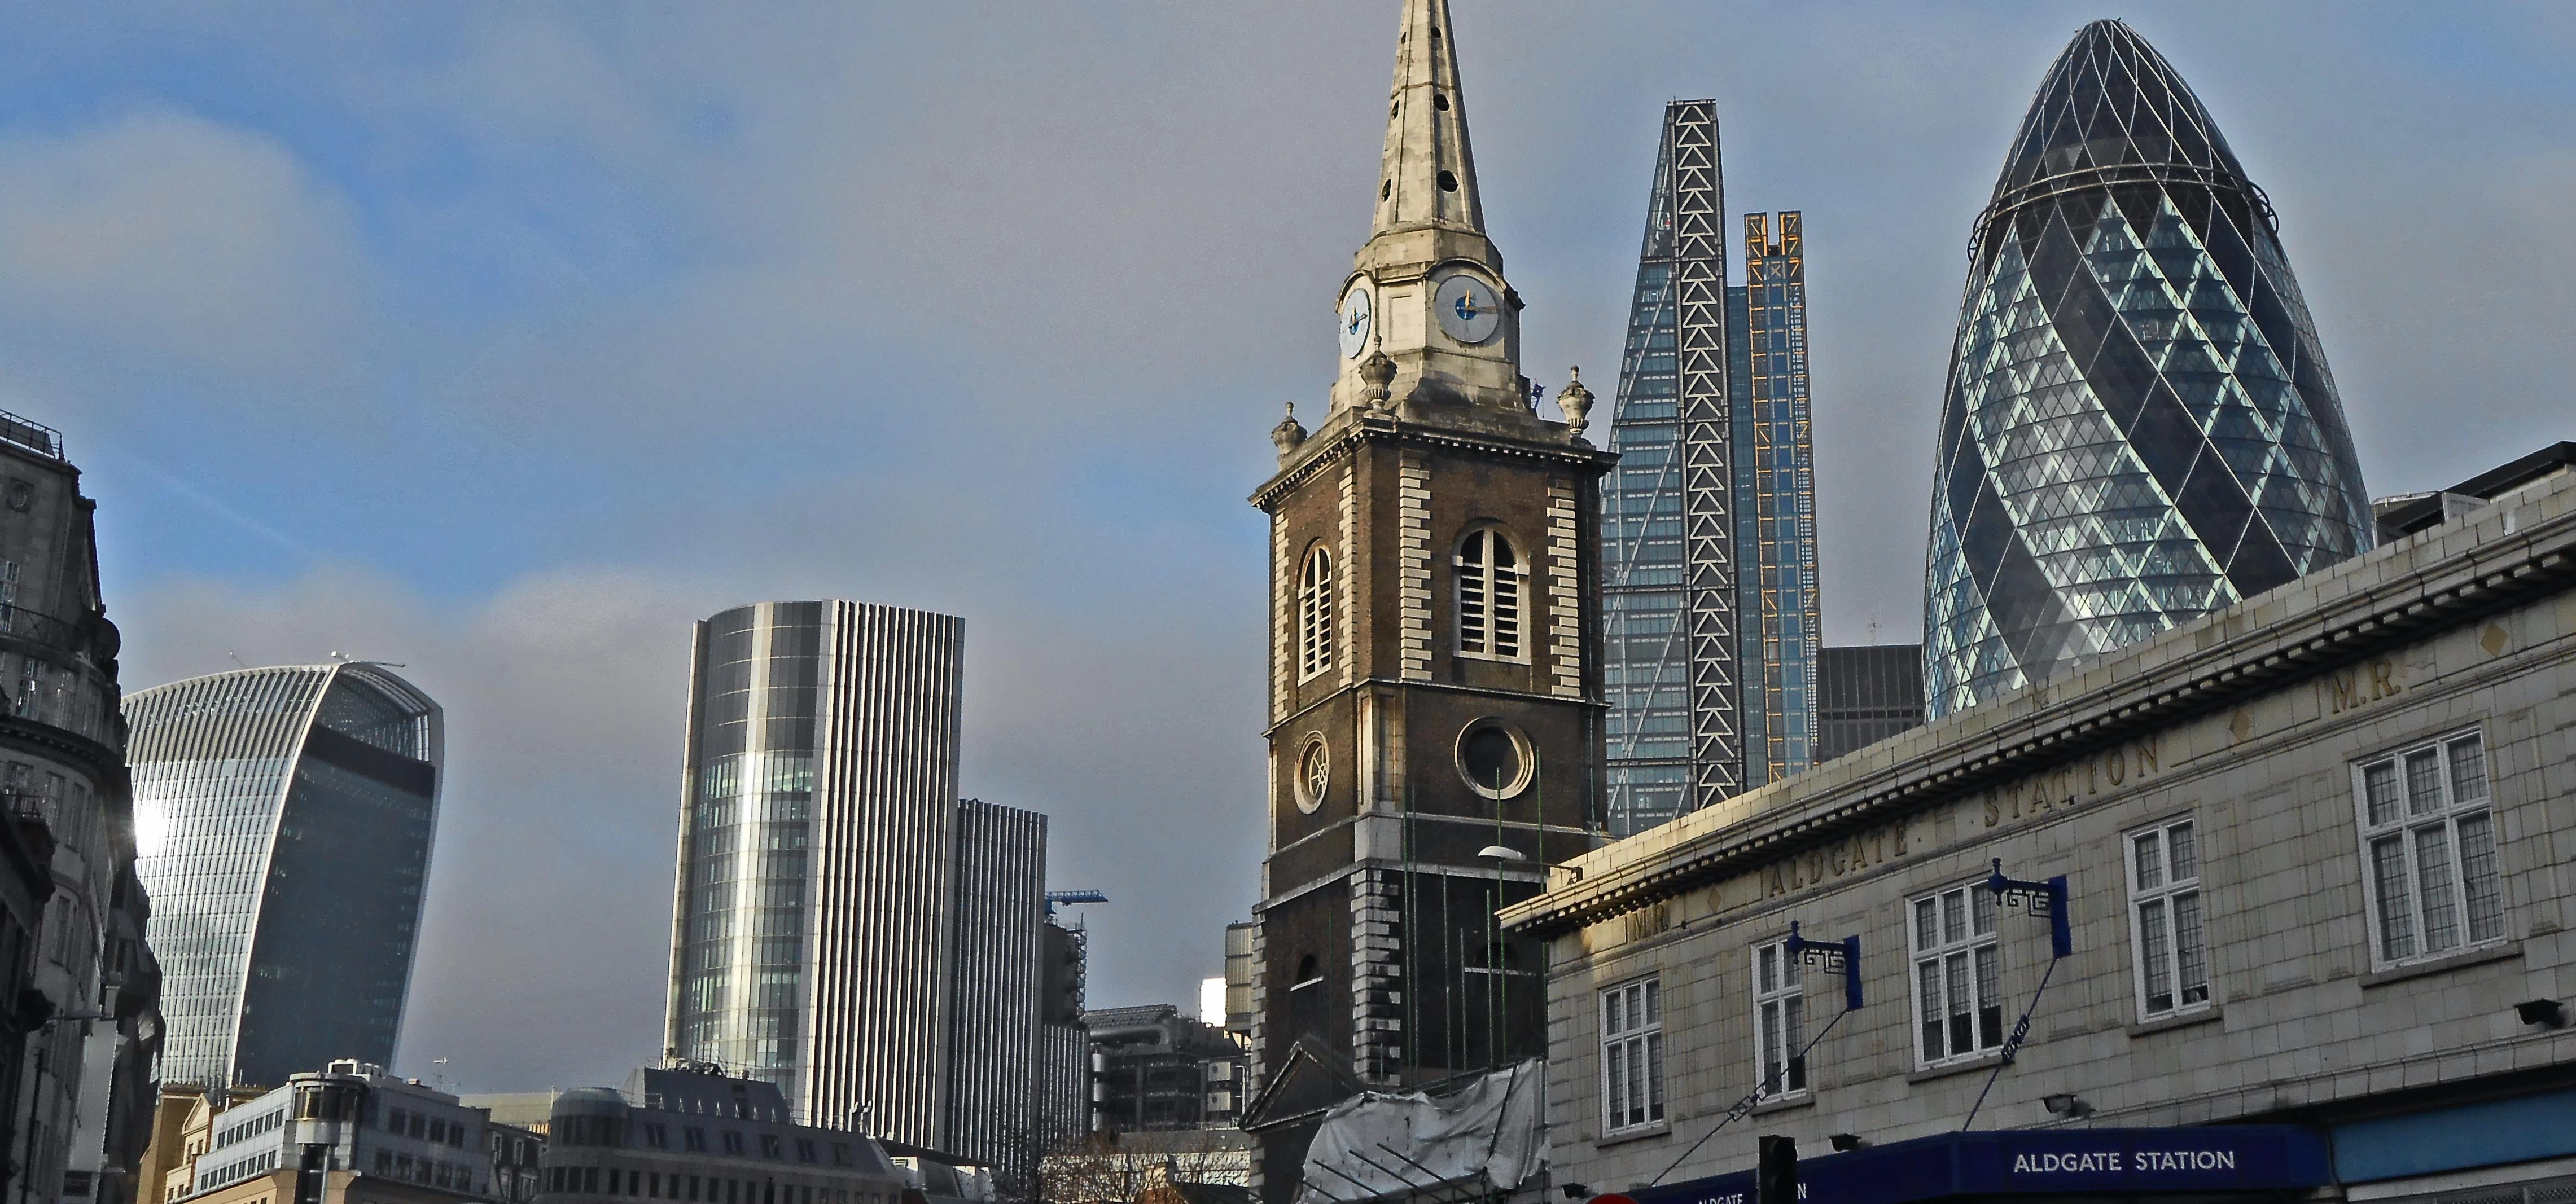 The City from Aldgate